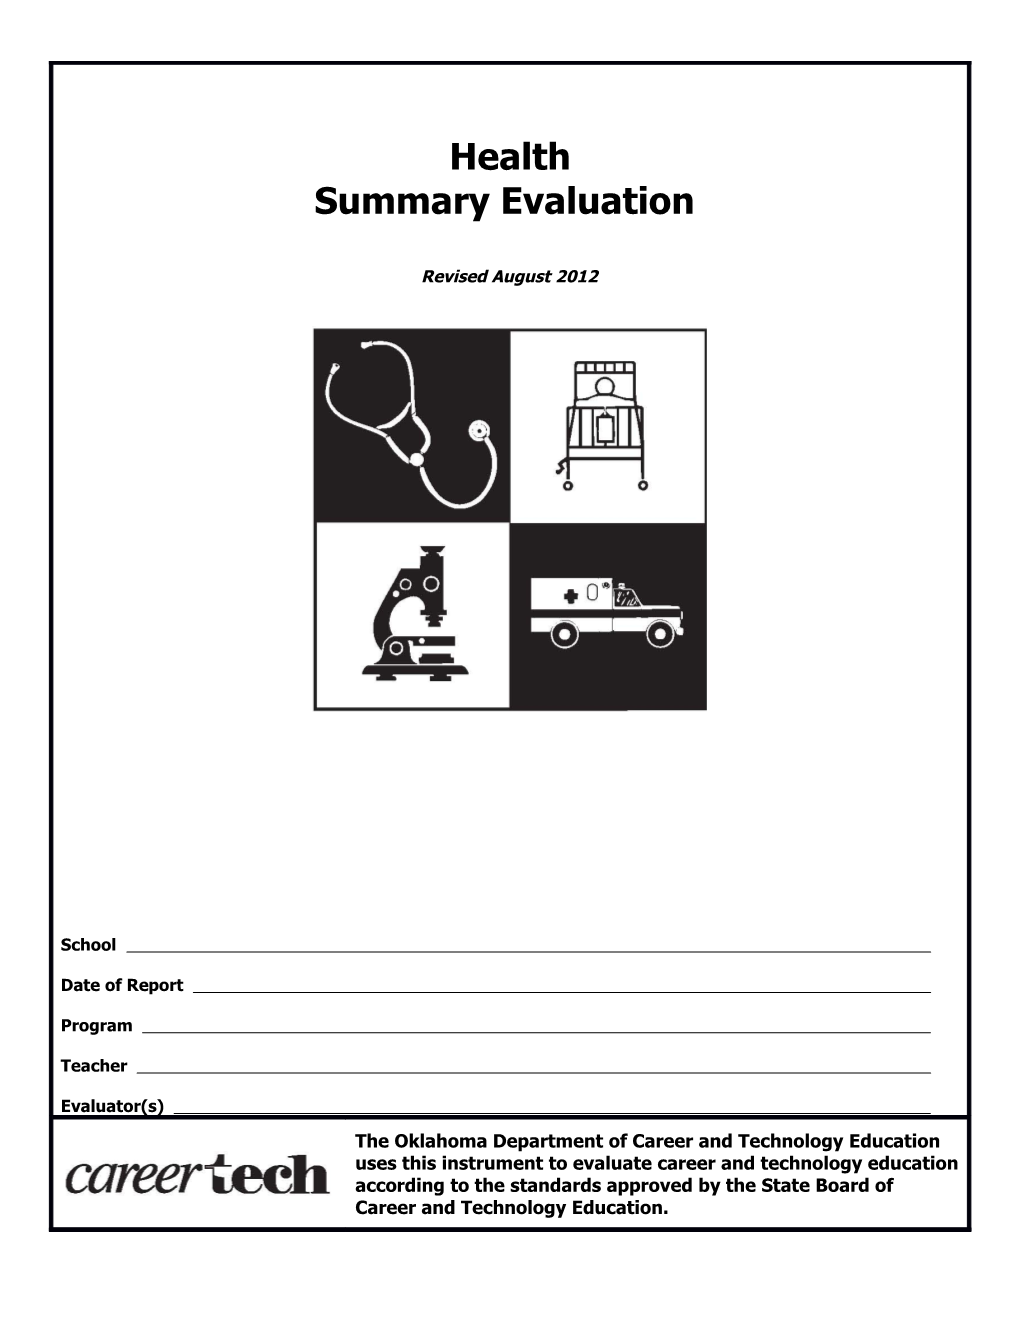 The Summary Evaluation Questionnaire Was Developed to Assist in Evaluating the Instructional